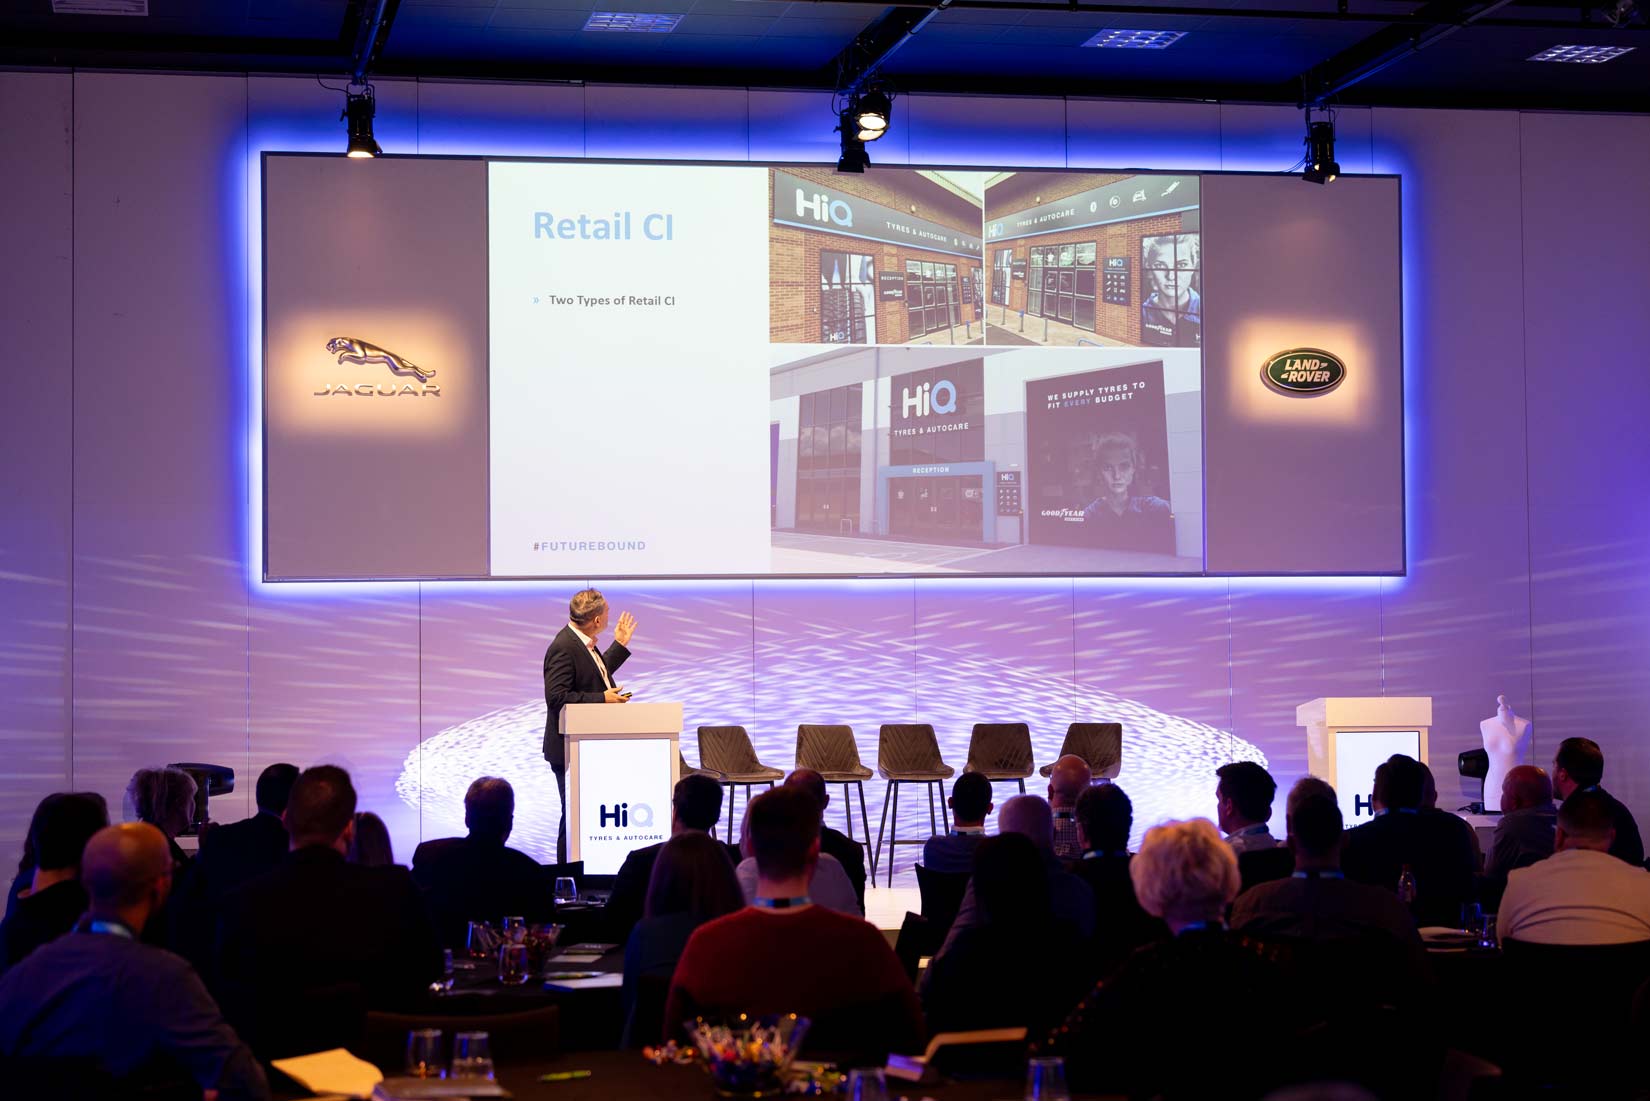 Presenter-on-stage-and-audience-Birmingham-conference